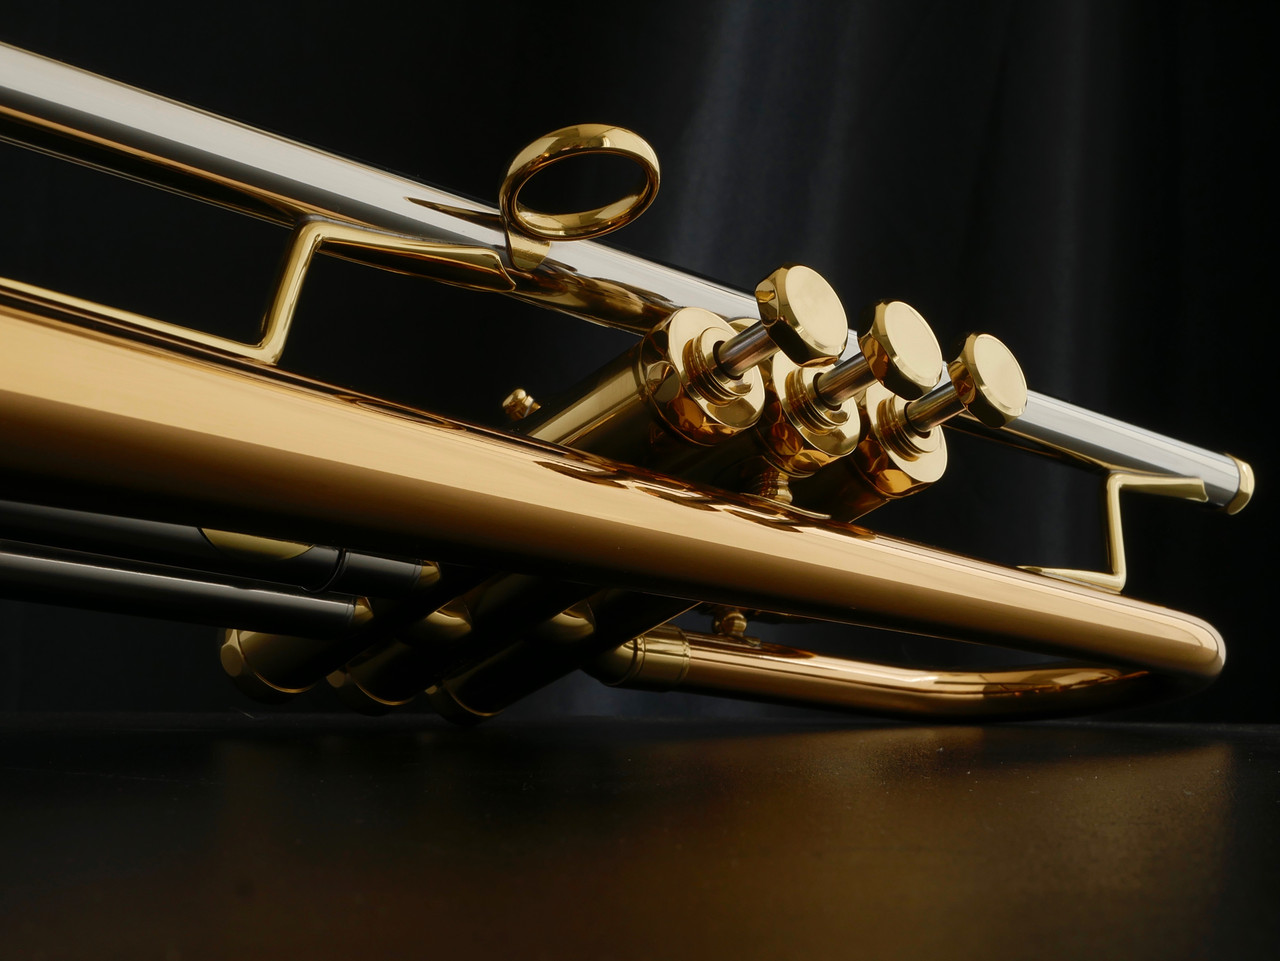 Just arrived! A Restock of the amazing Schagerl James Morrison JM2-L Bb  Trumpet in Lacquer